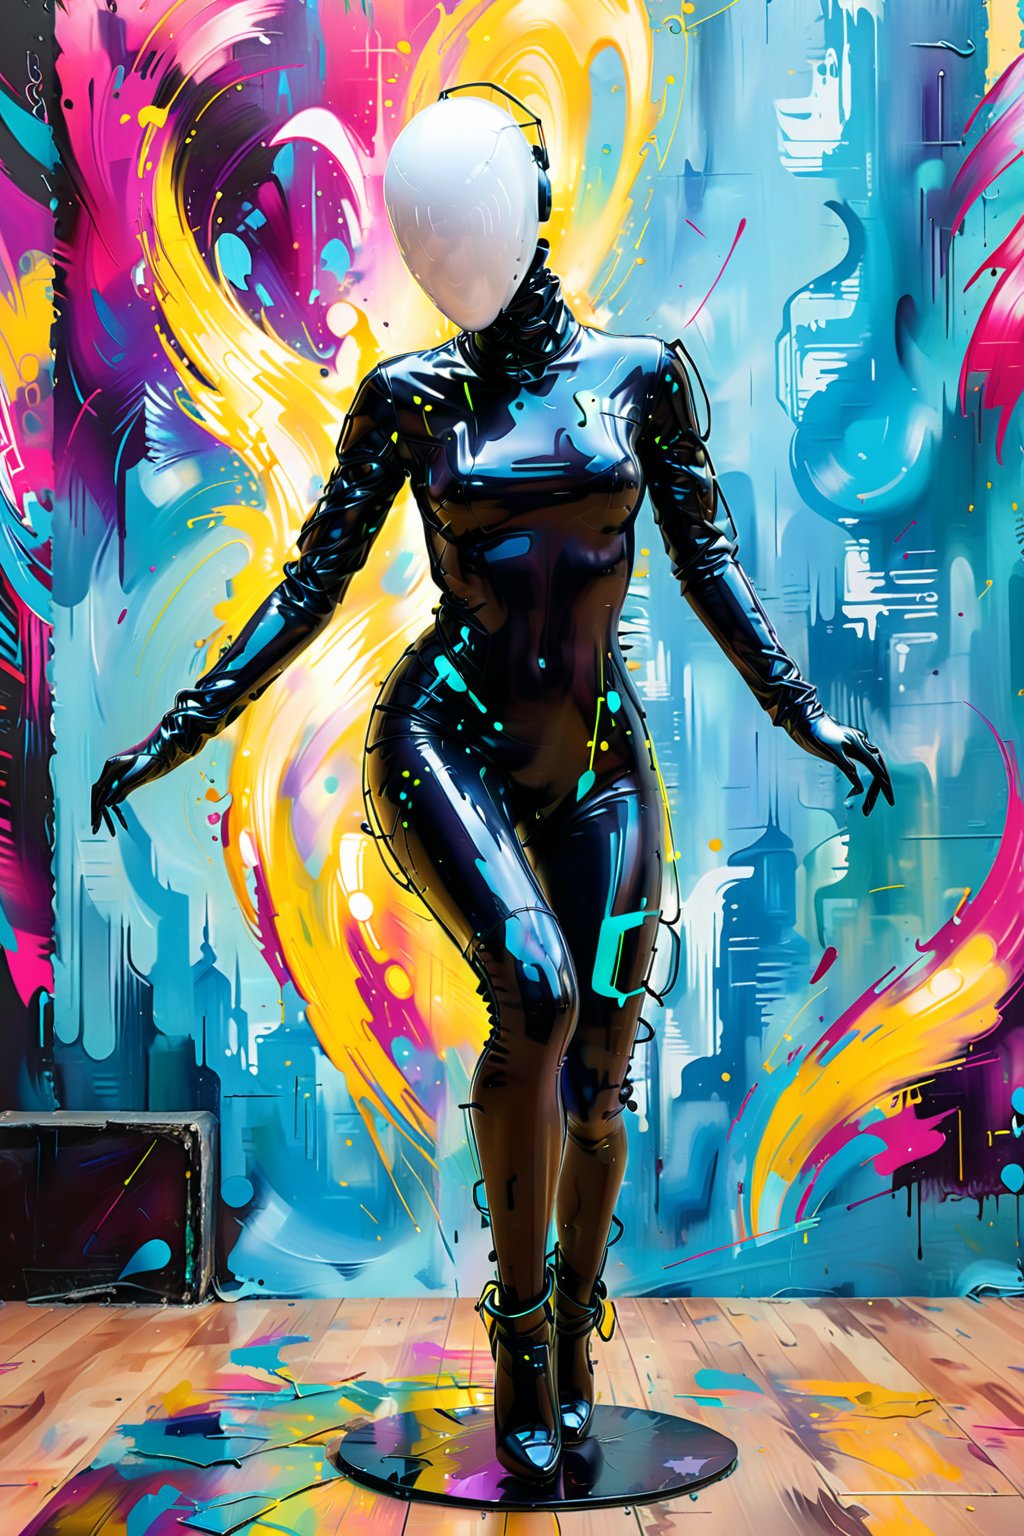 a magnificent digital painting of cyber punk mannequin faceless egghead caught in an exotic and wild dance against an abstract background. Use a vivid color palette to bring out the intensity of the scene. Capture the energy and flamboyance of mannequin's dance moves, making it an unforgettable piece of AI art.